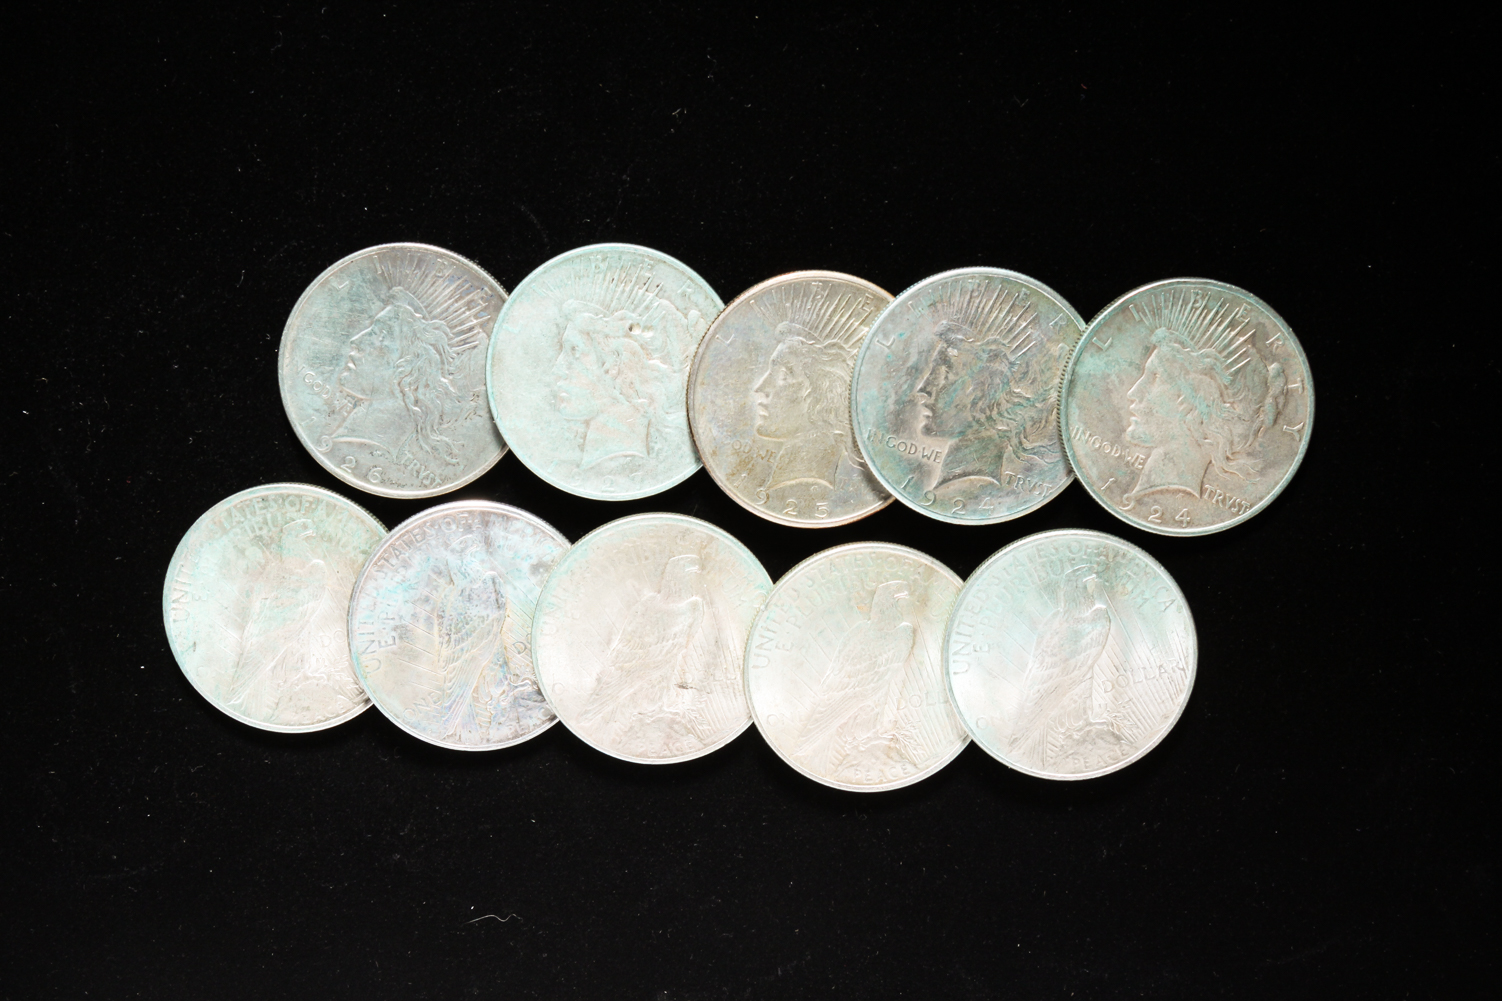 GROUP OF TEN SILVER PEACE DOLLARS